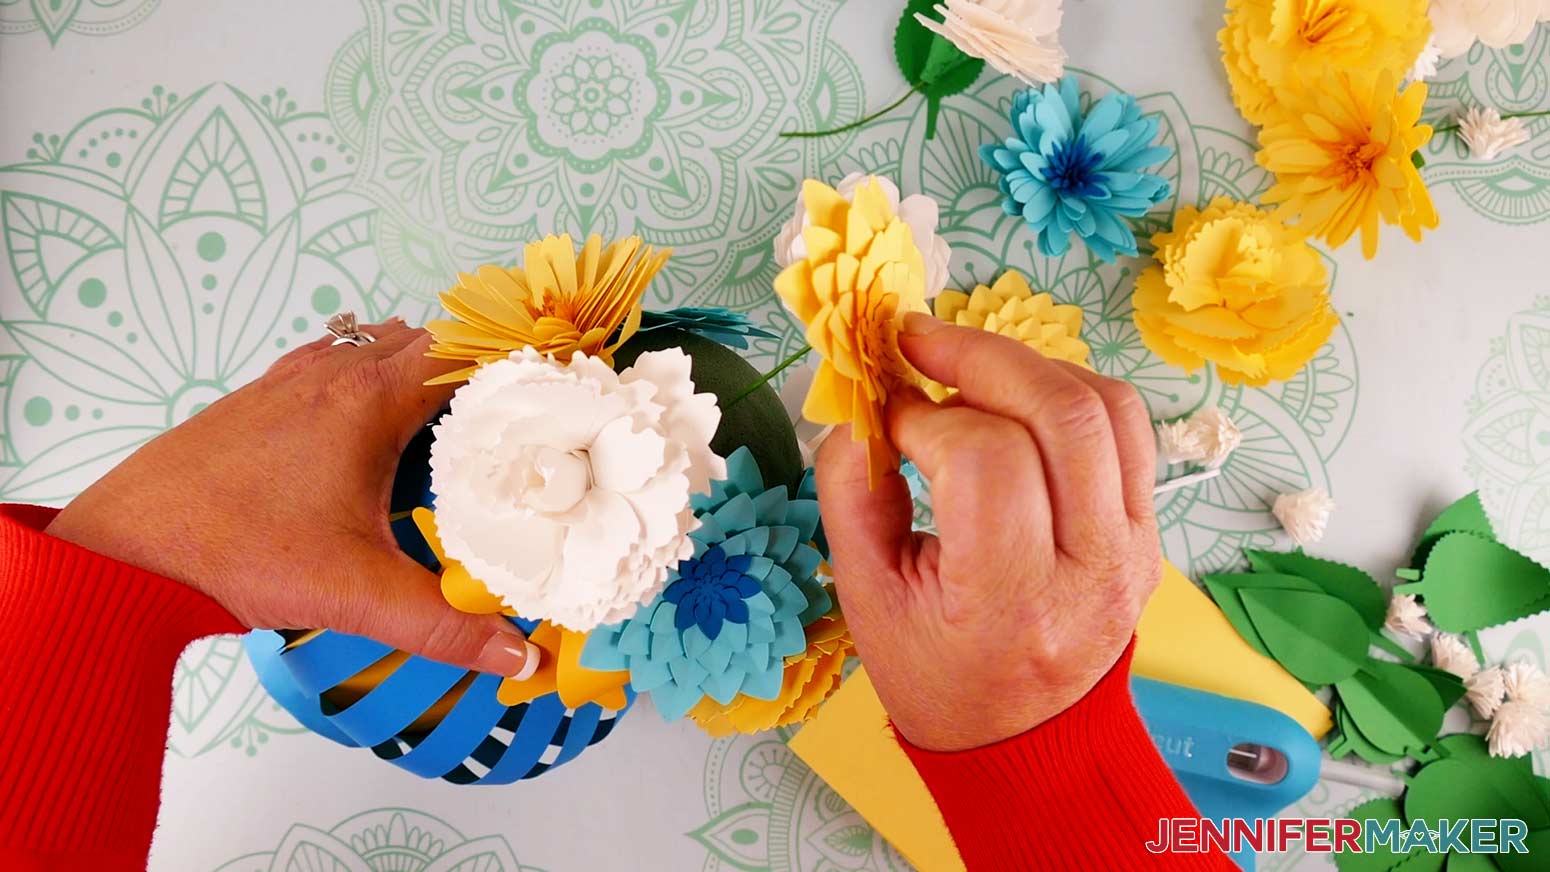 Insert the free end of a paper flower stem into the foam hemisphere on the paper flower bouquet vase